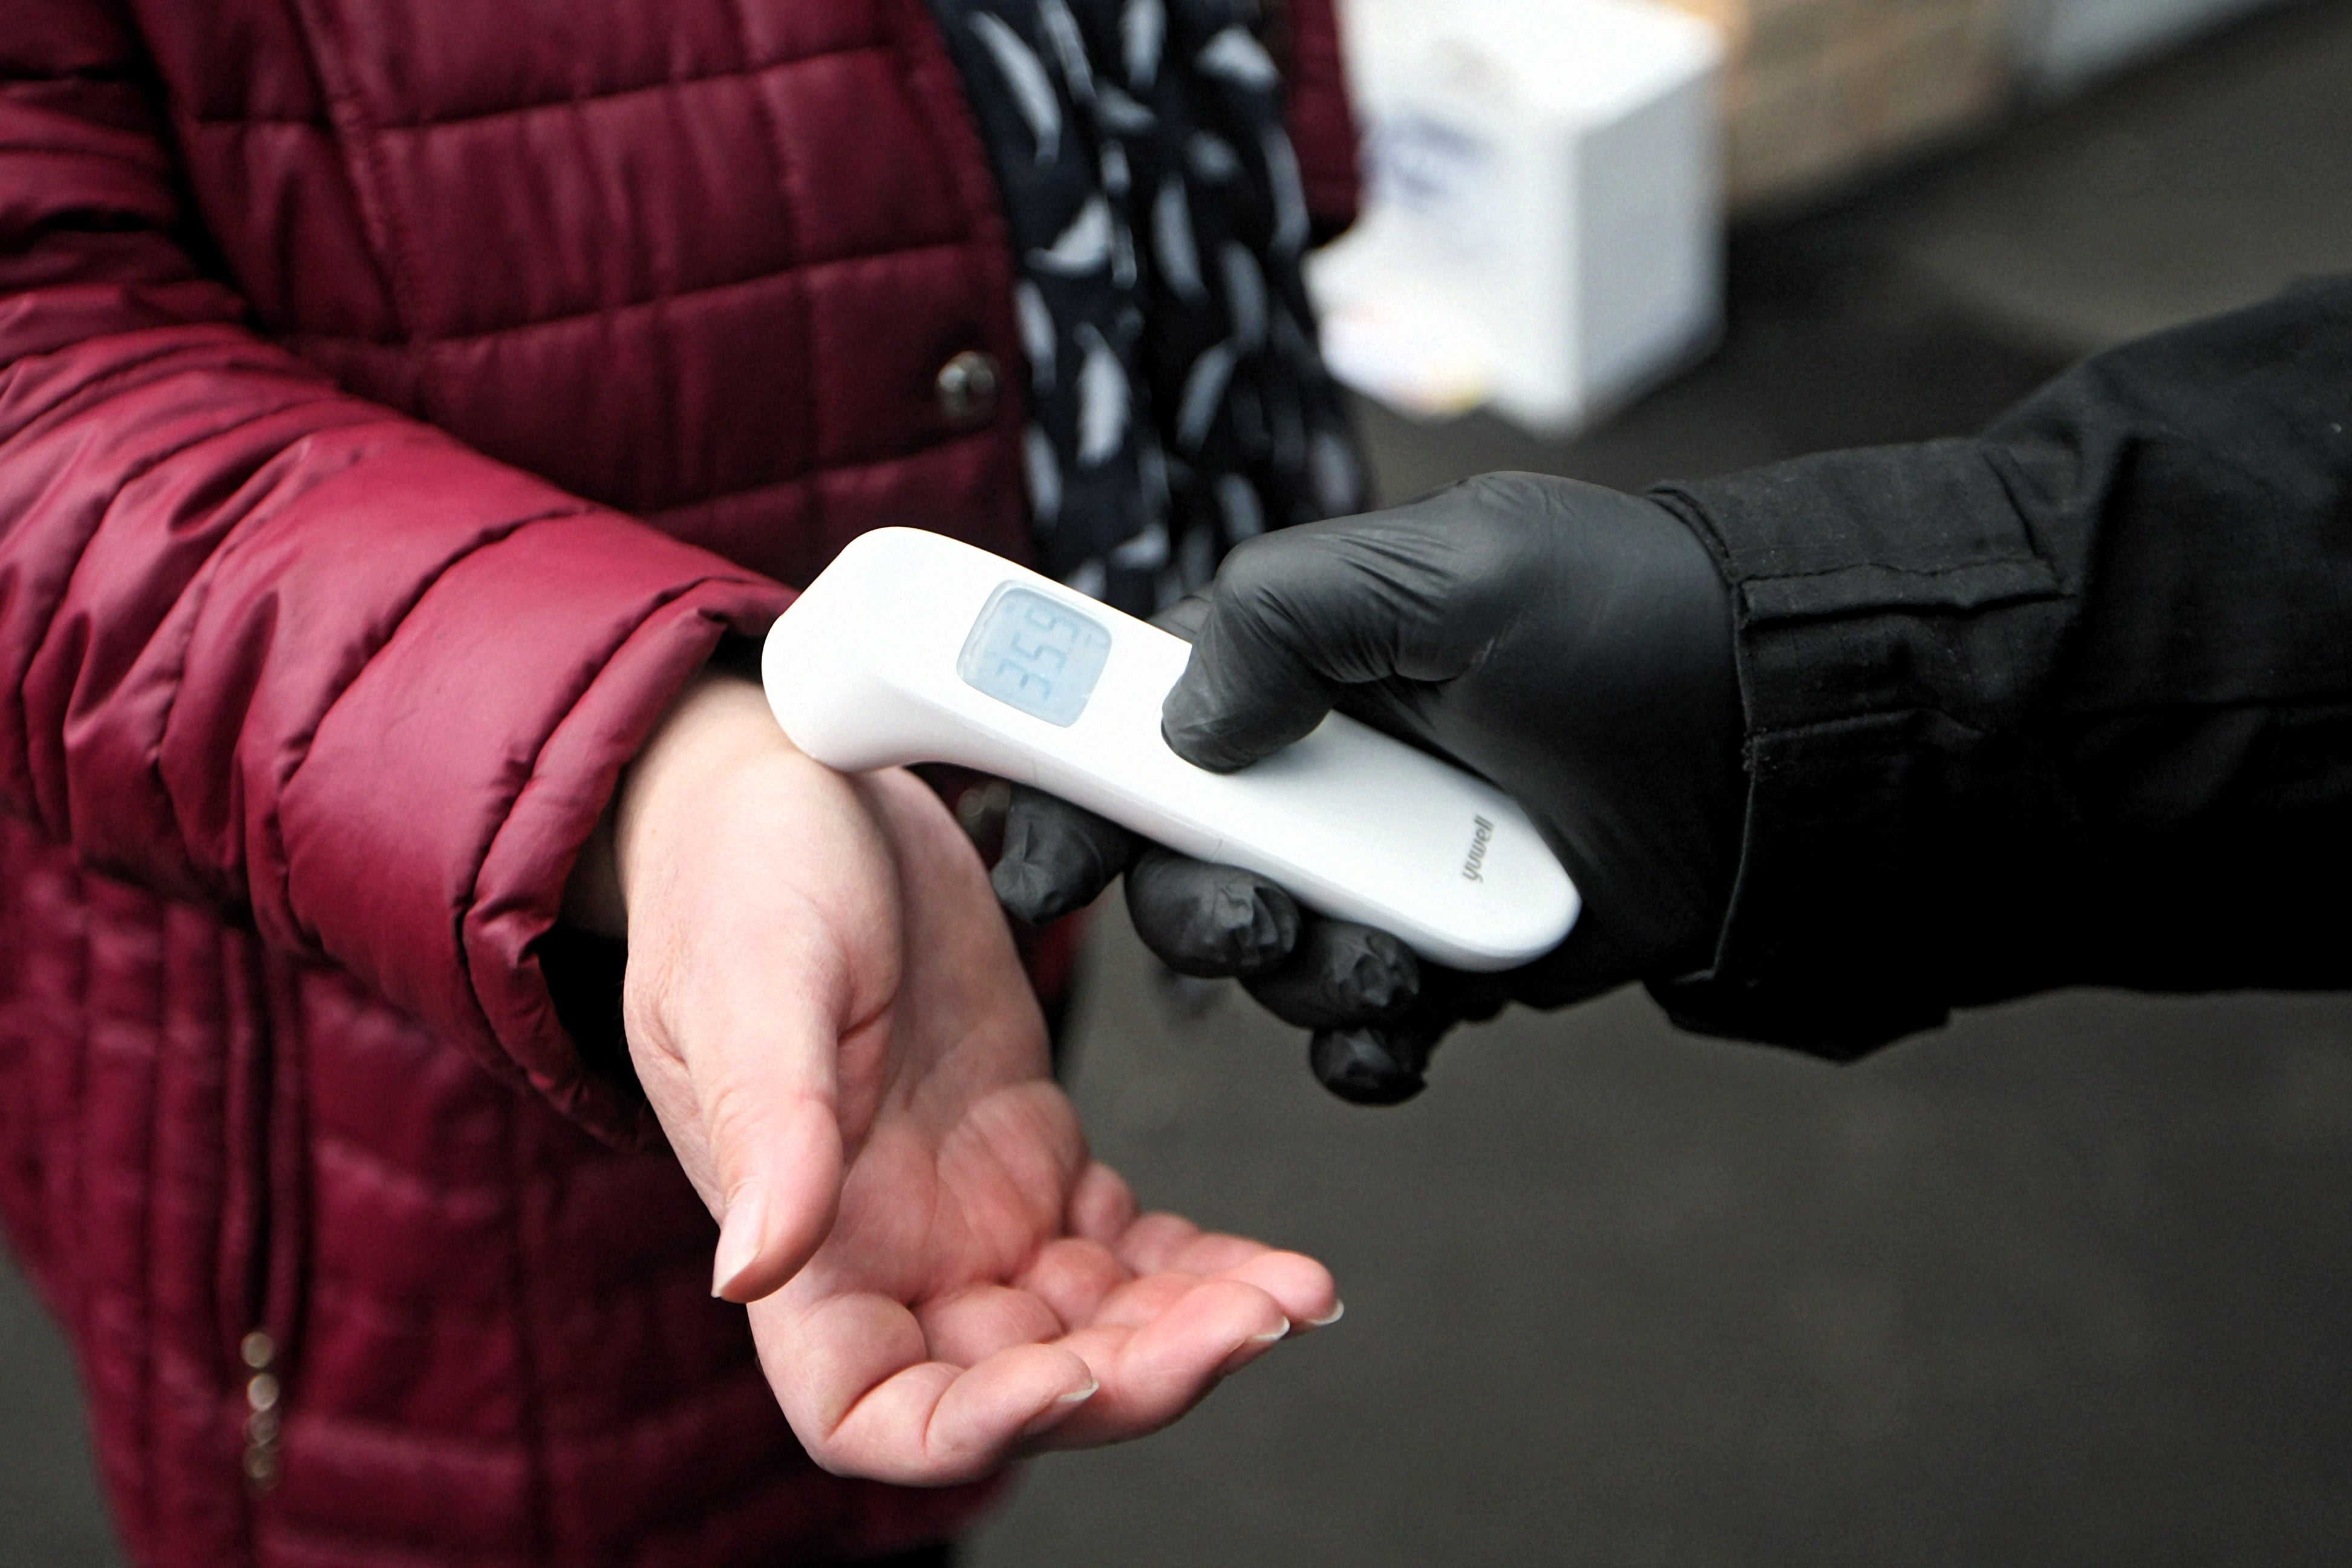 A woman’s body temperature is read with a contactless thermometer.